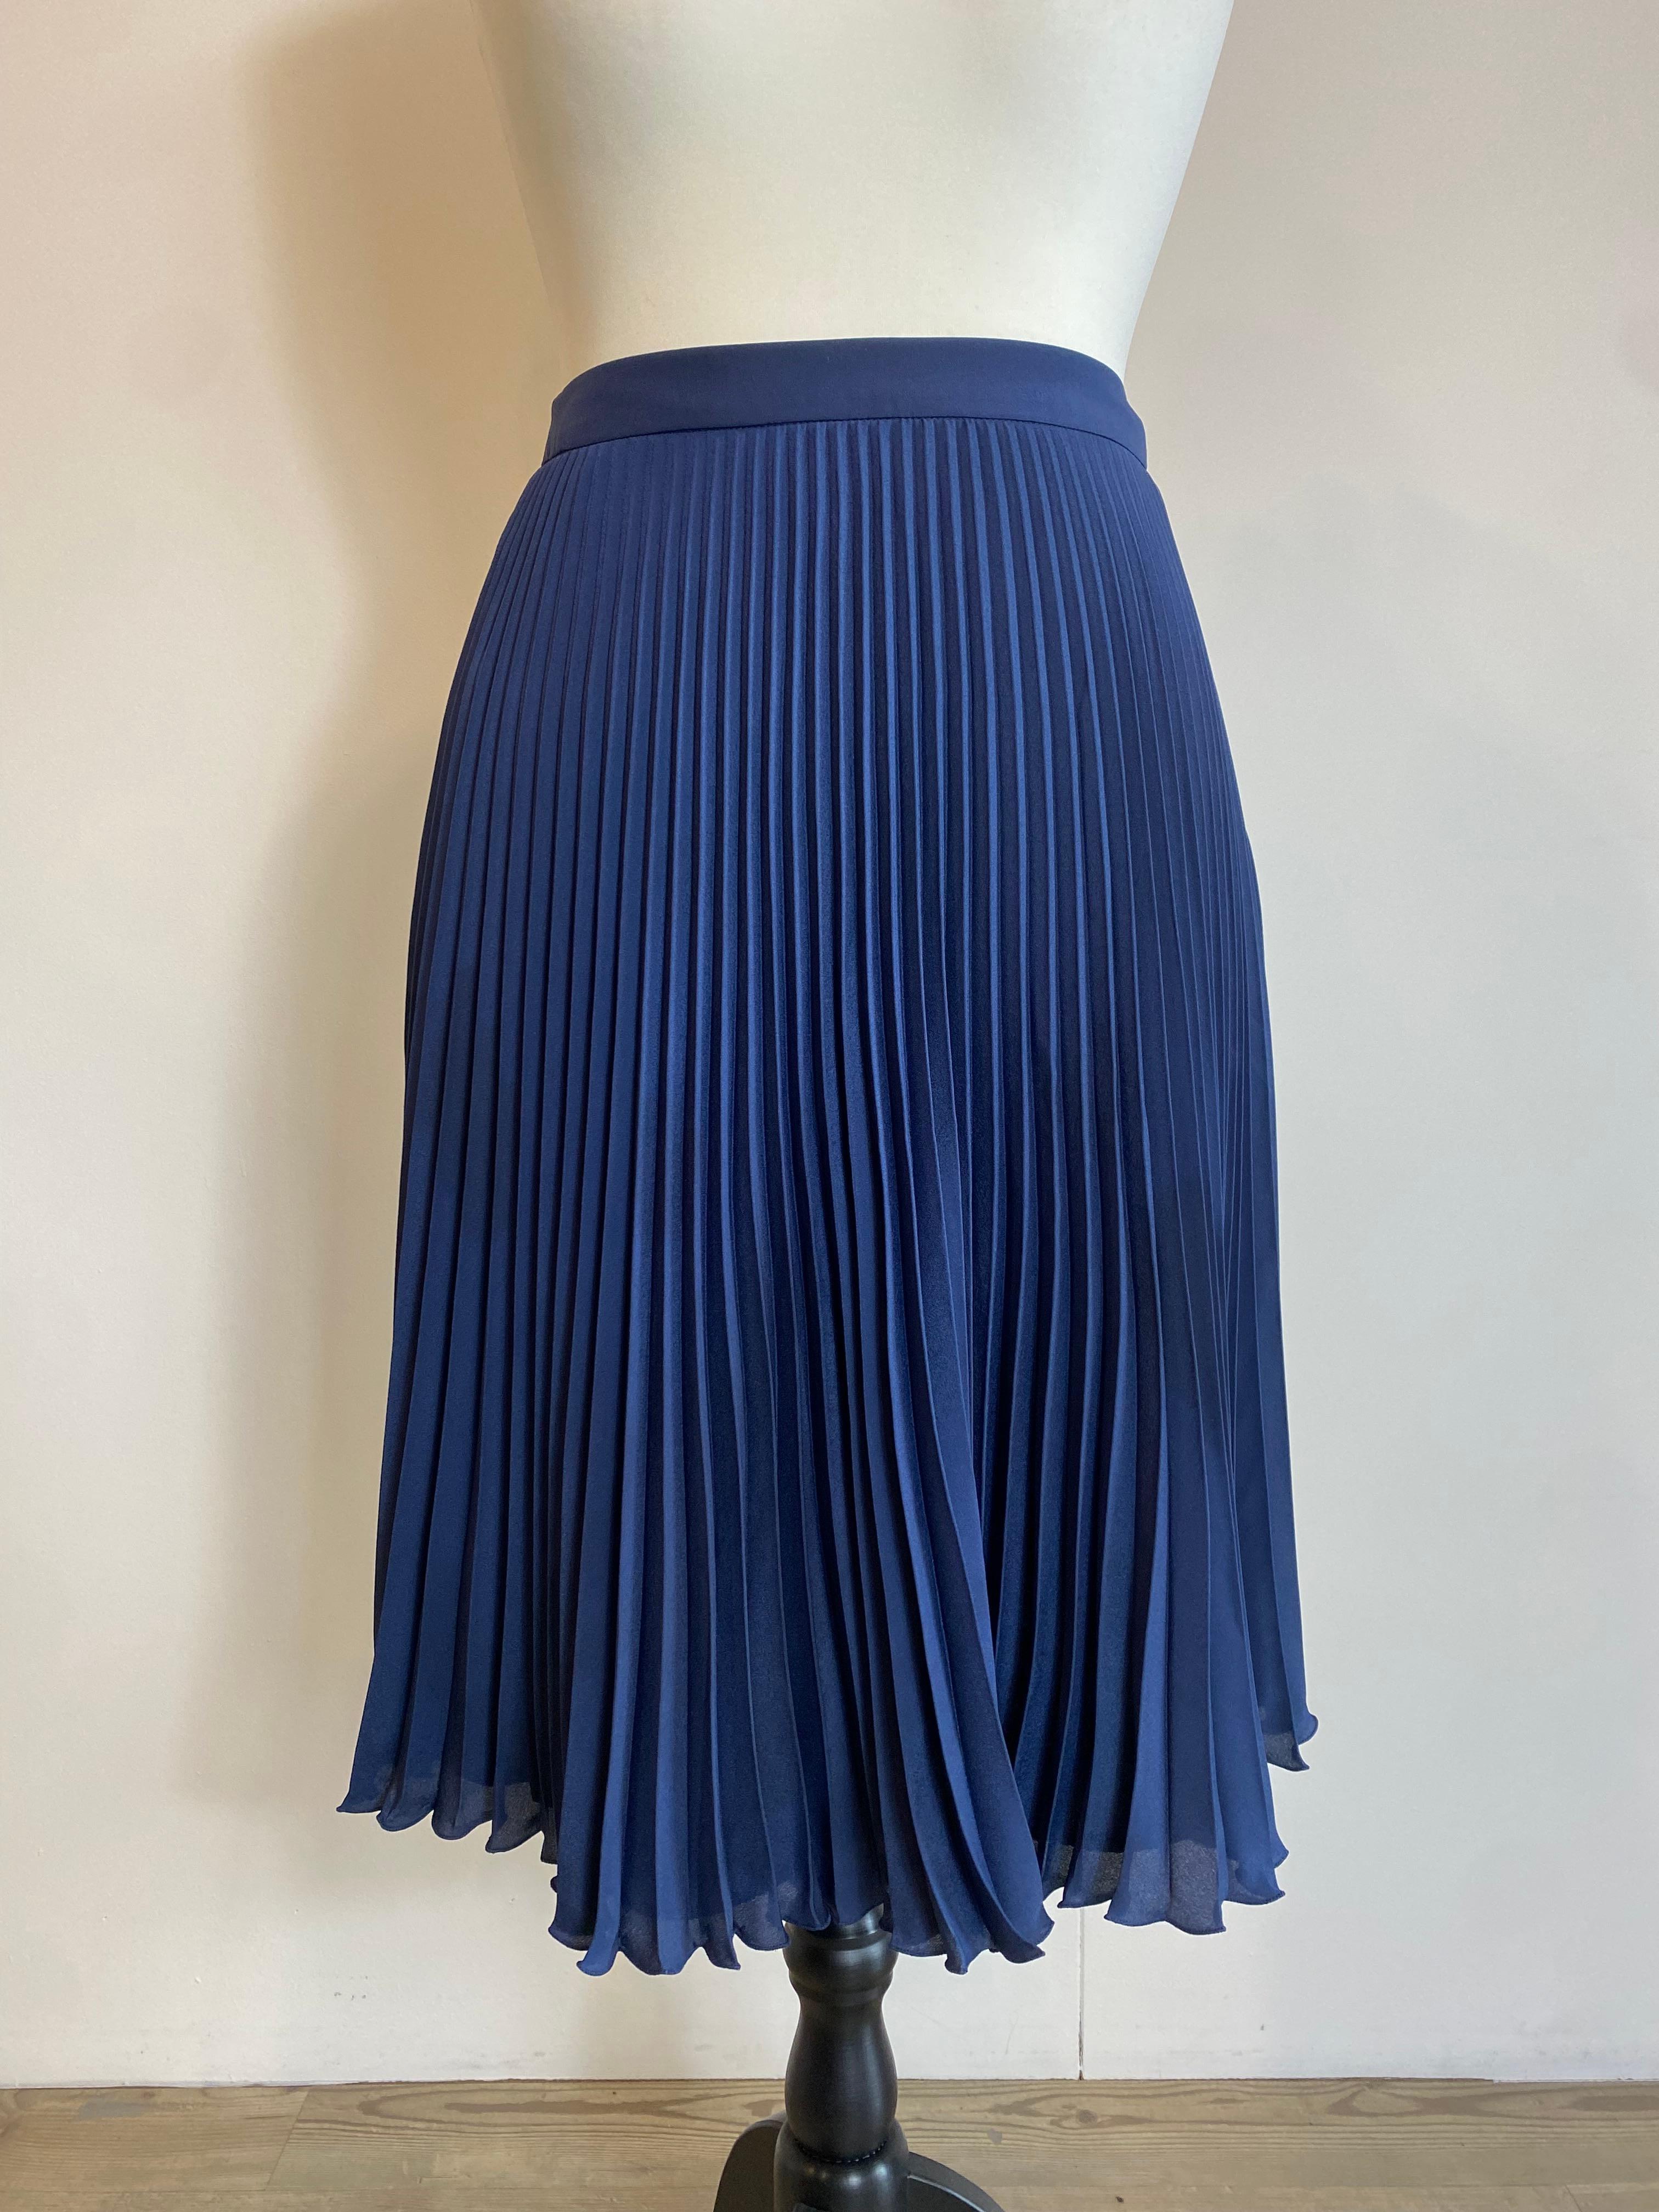 Prada navy blue pleated skirt In Excellent Condition For Sale In Carnate, IT